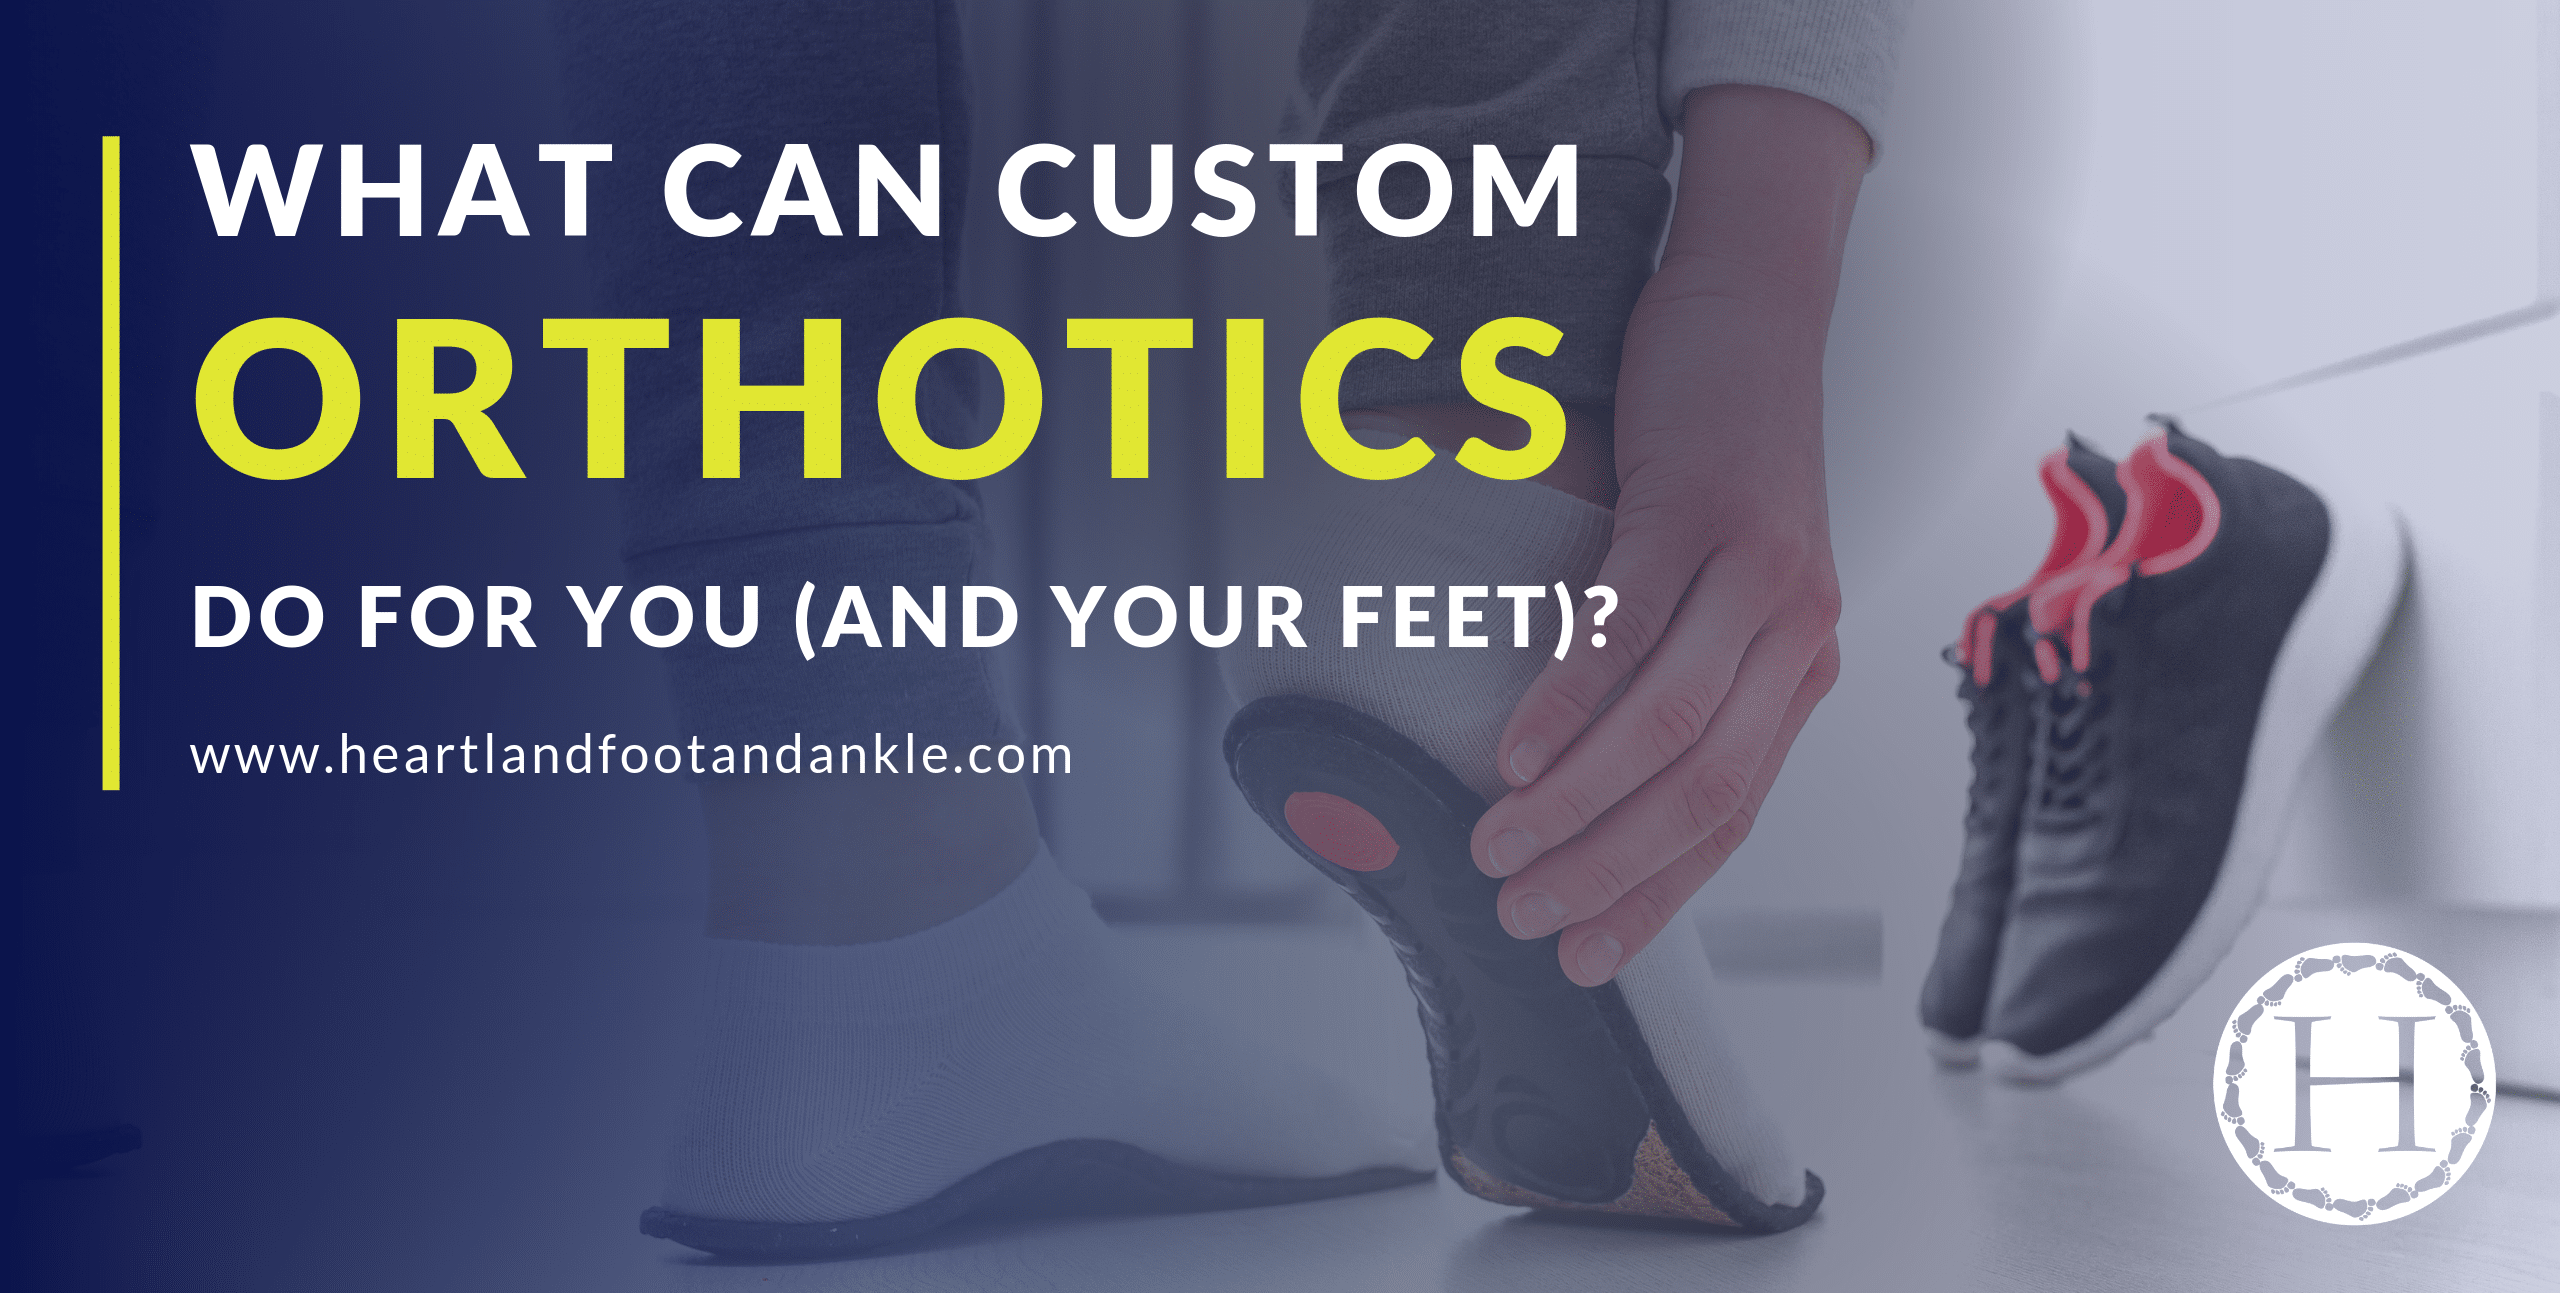 What Can Custom Orthotics Do For Your Feet? - Heartland Foot & Ankle